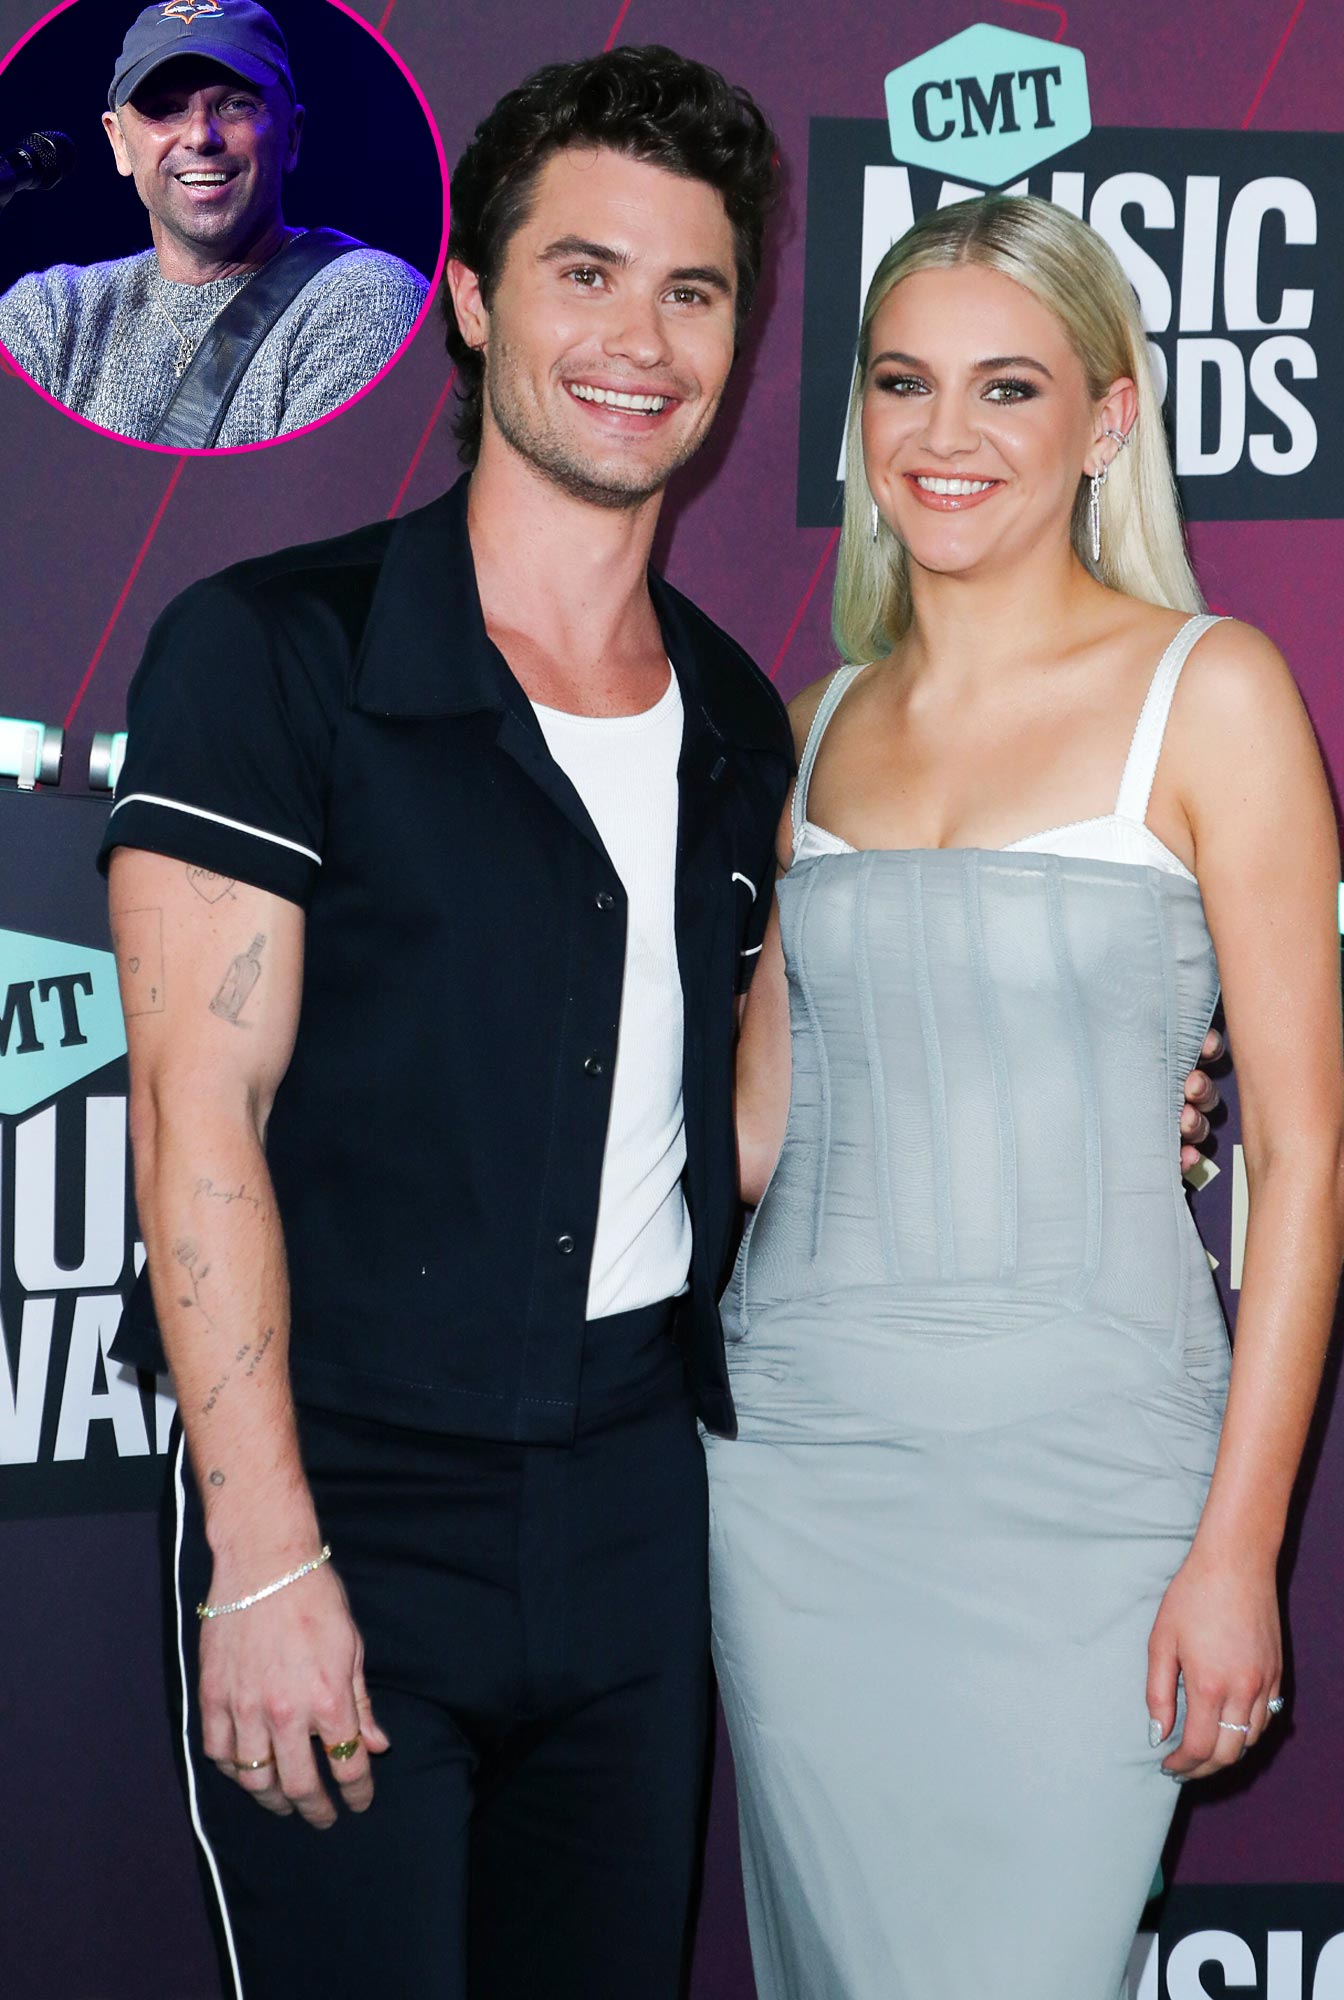 ‘Bring It on Home John B’! Chase Stokes Joins Kelsea Ballerini on Stage